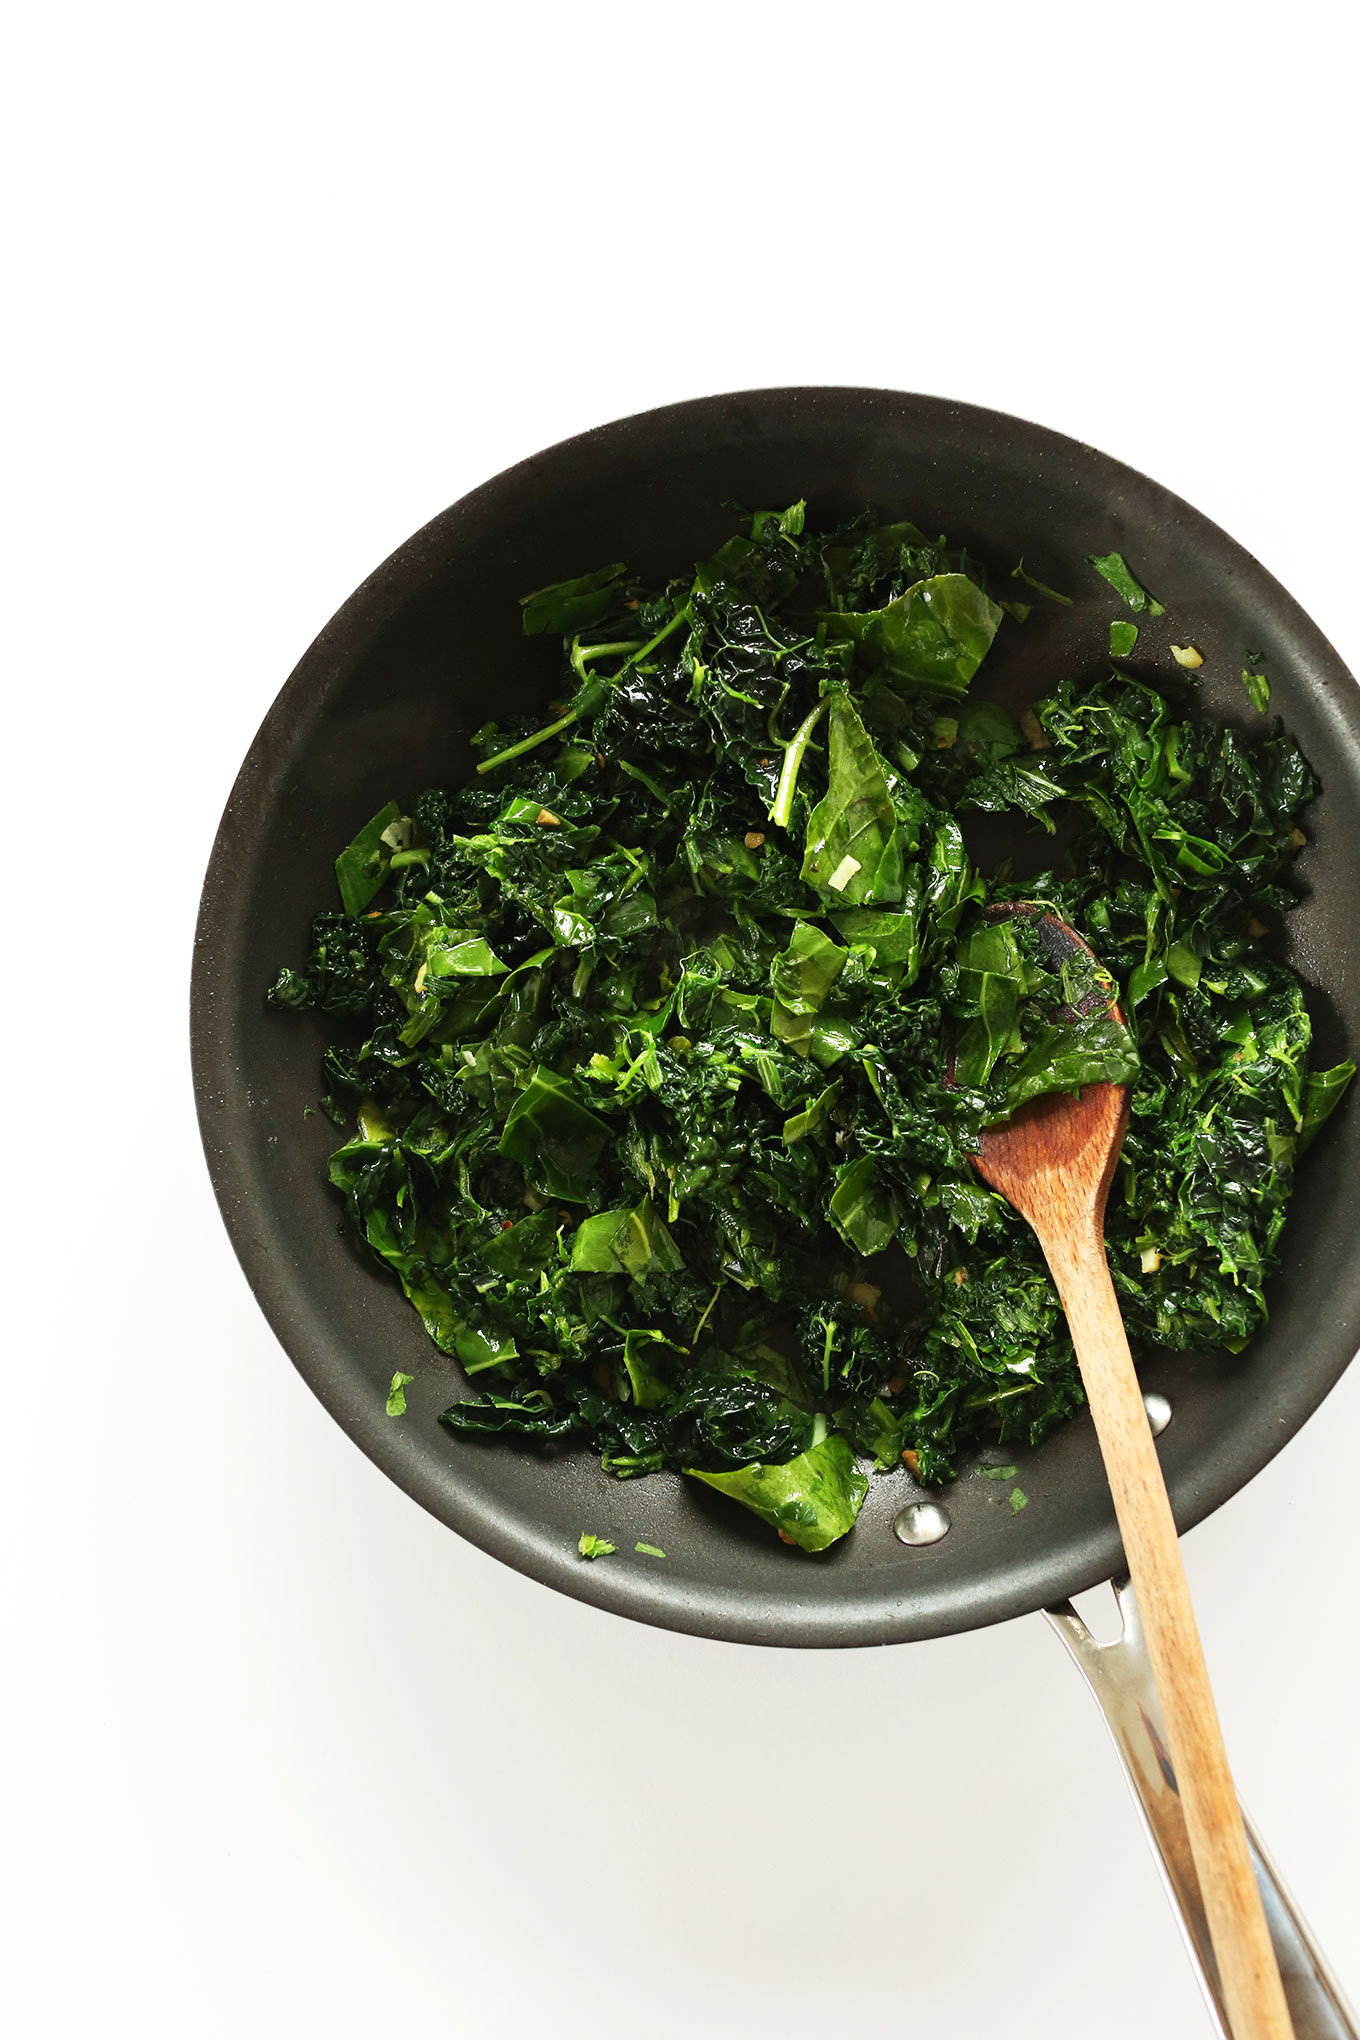 Cooking kale and spinach for a healthy gluten-free vegan appetizer